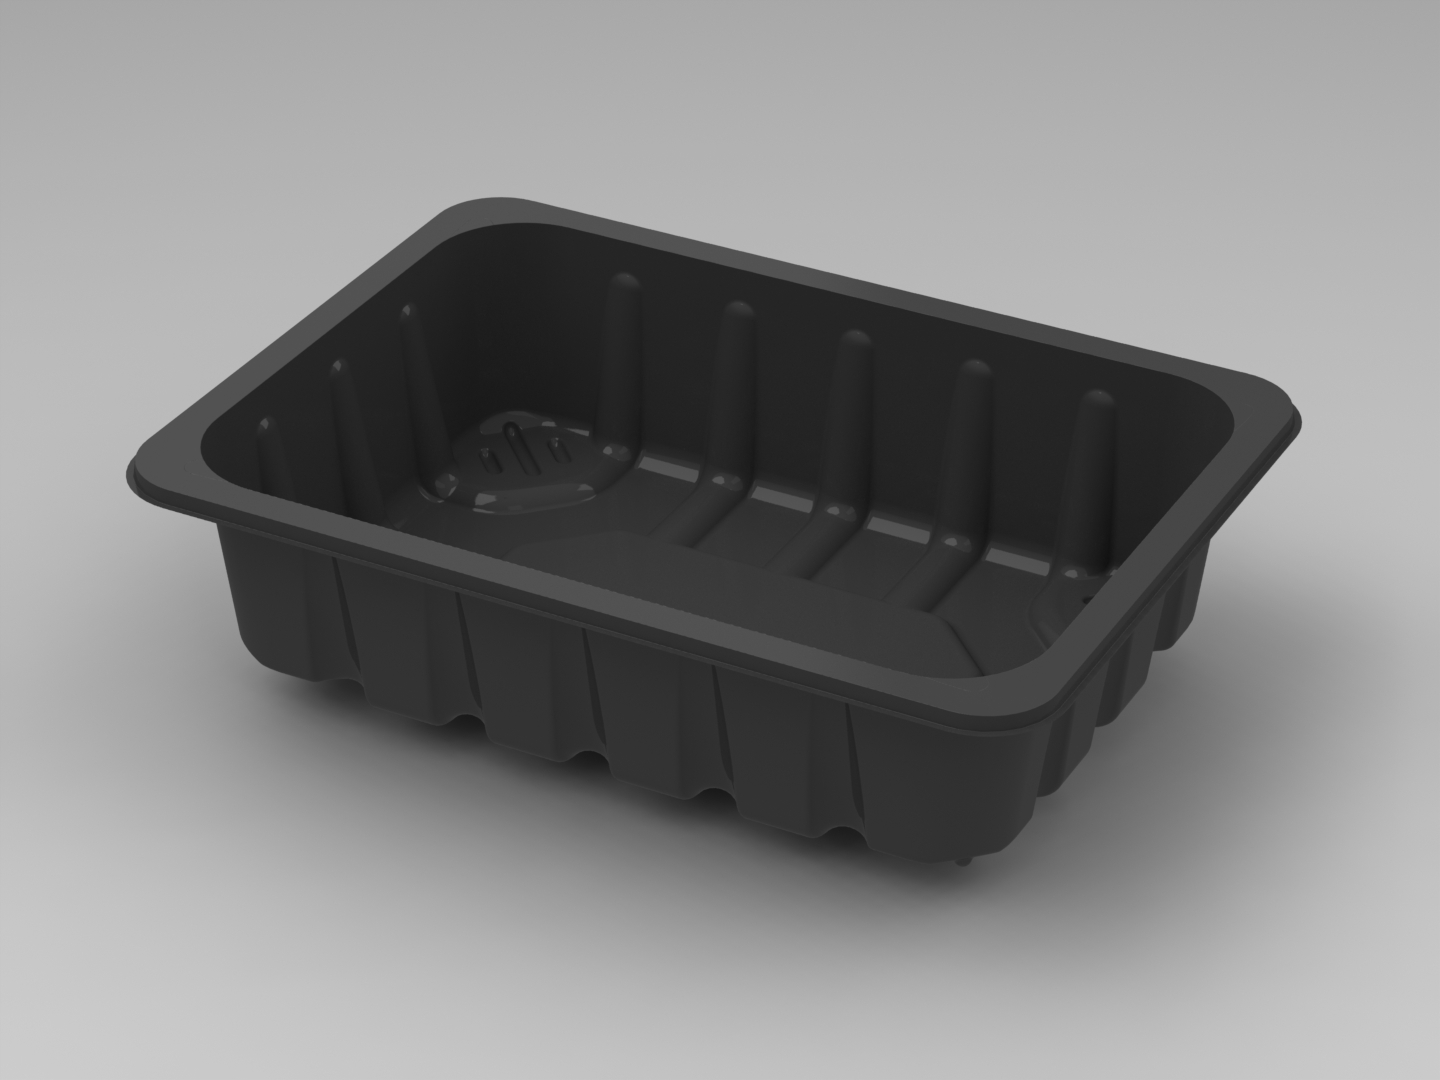 2 Series Meat Produce Tray (45mm)
	
		